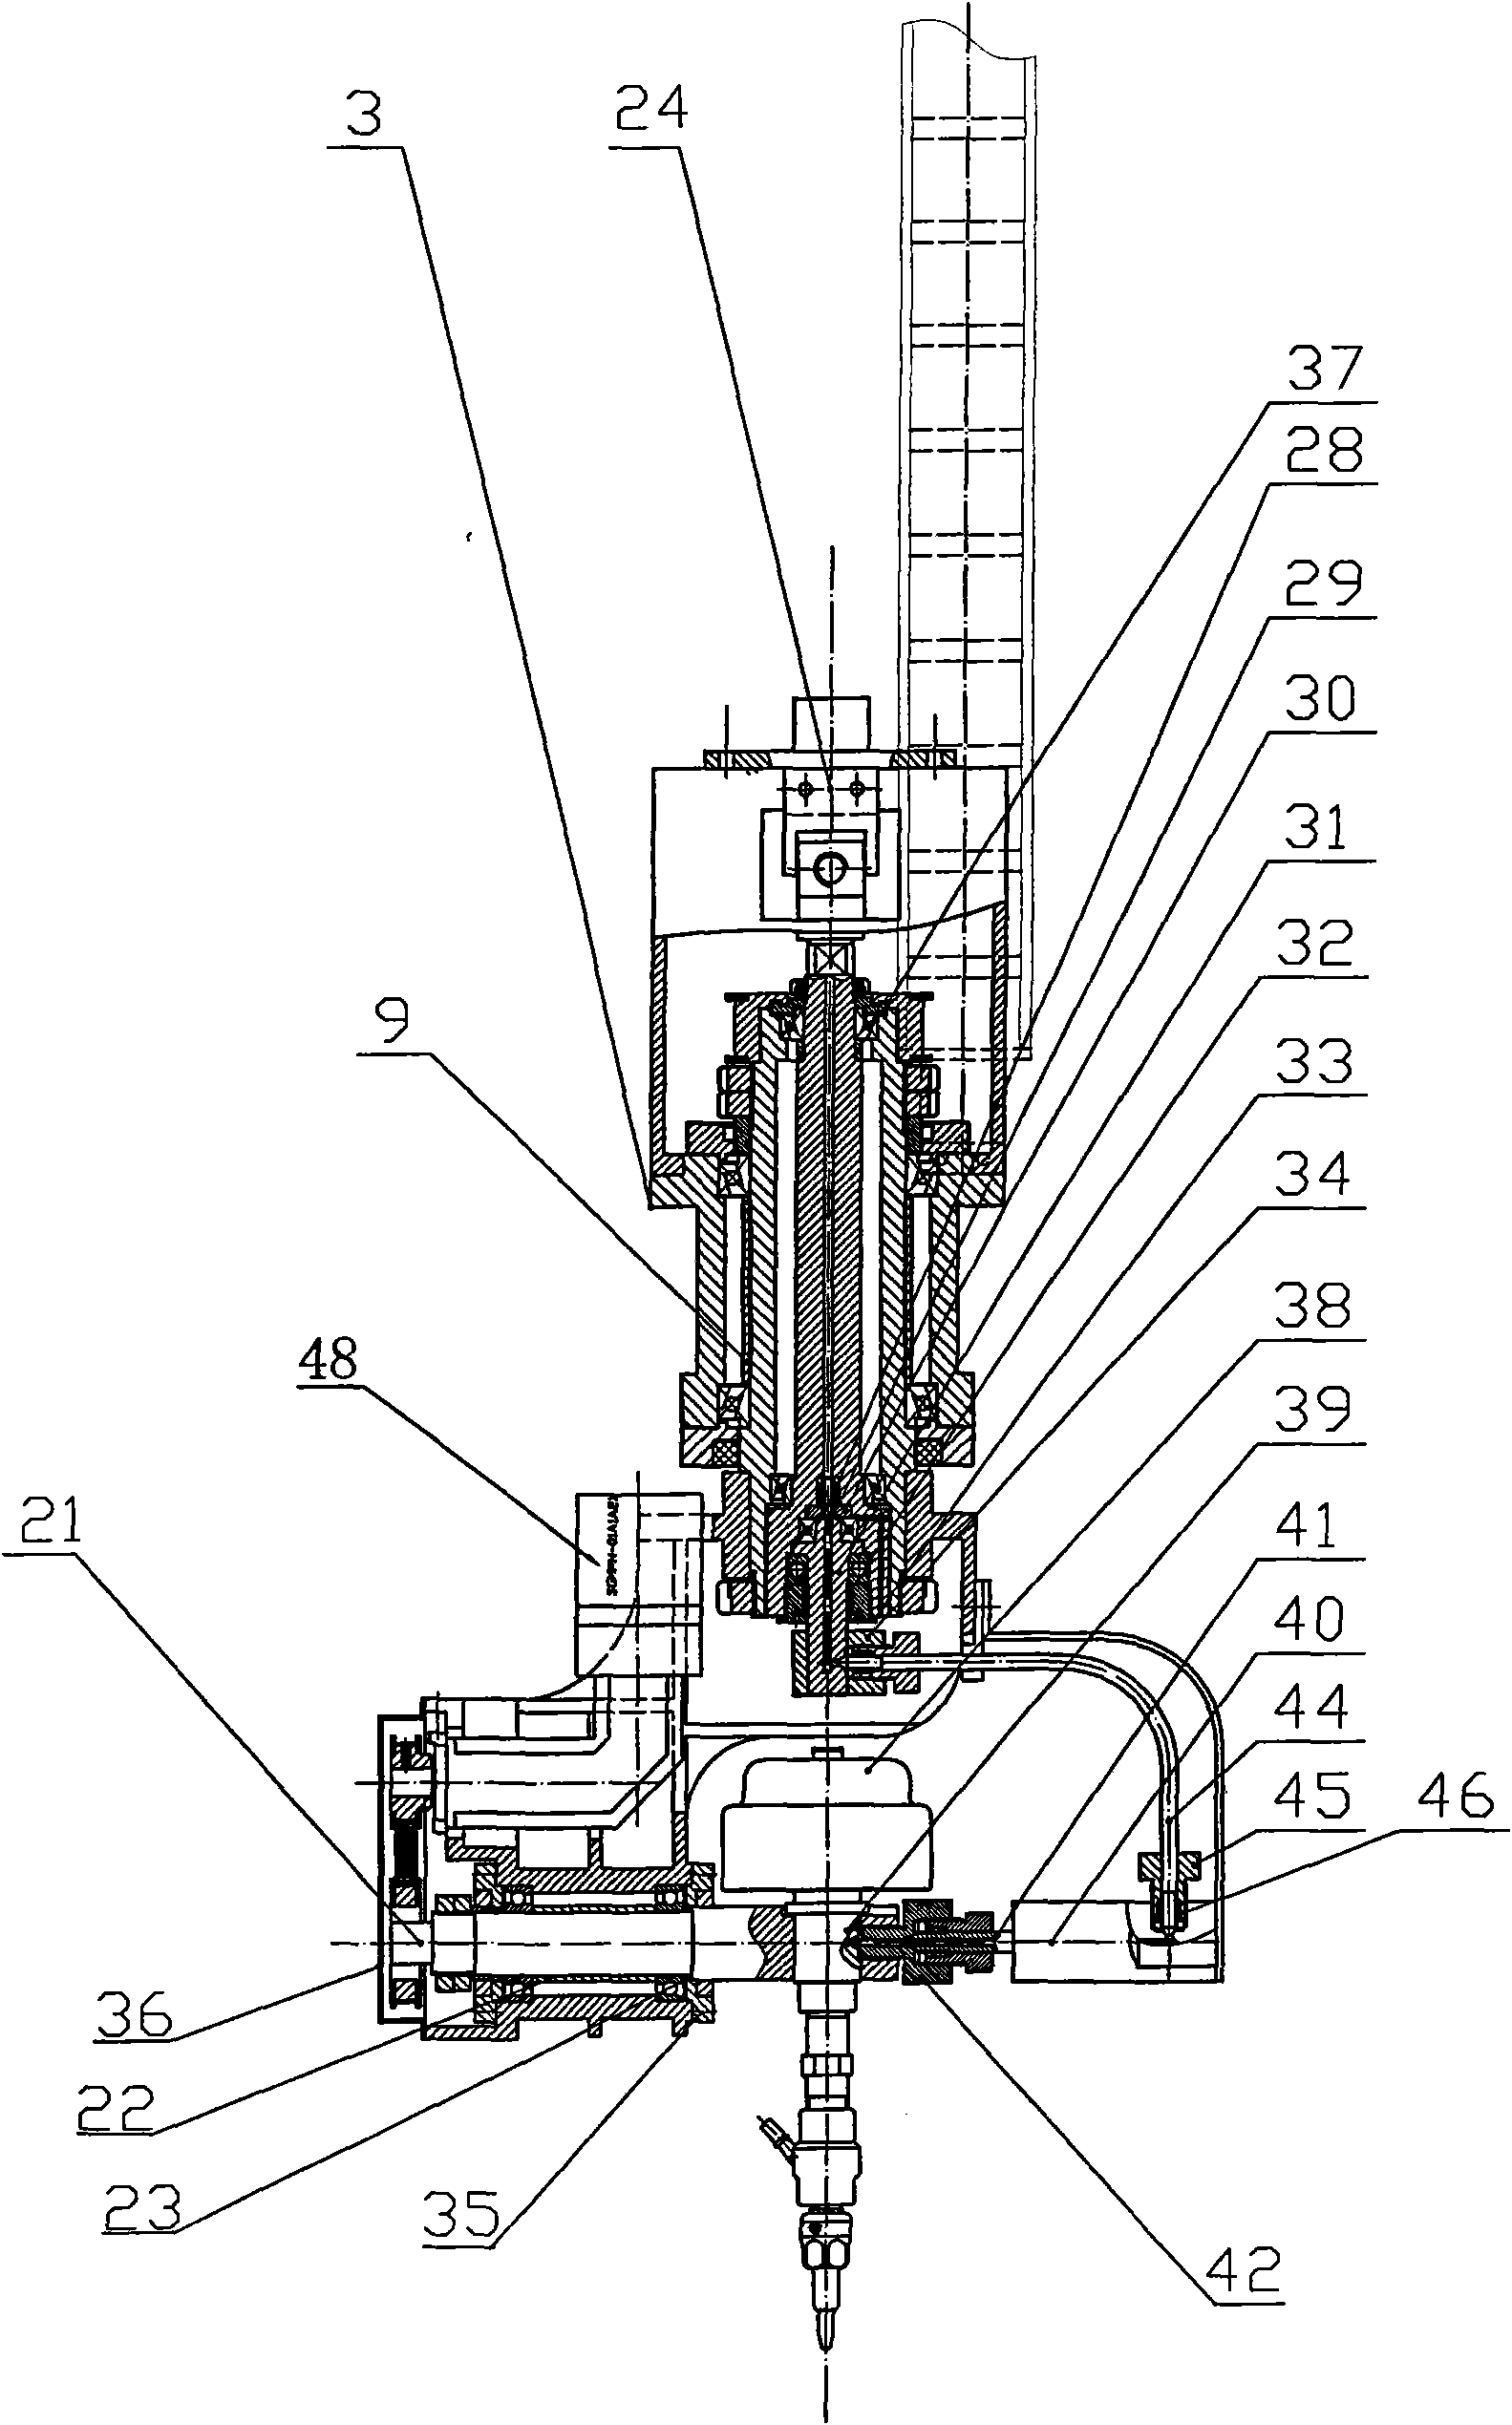 Five-axis controlled motion control mechanism of water cutting head with functions of rotation and swing